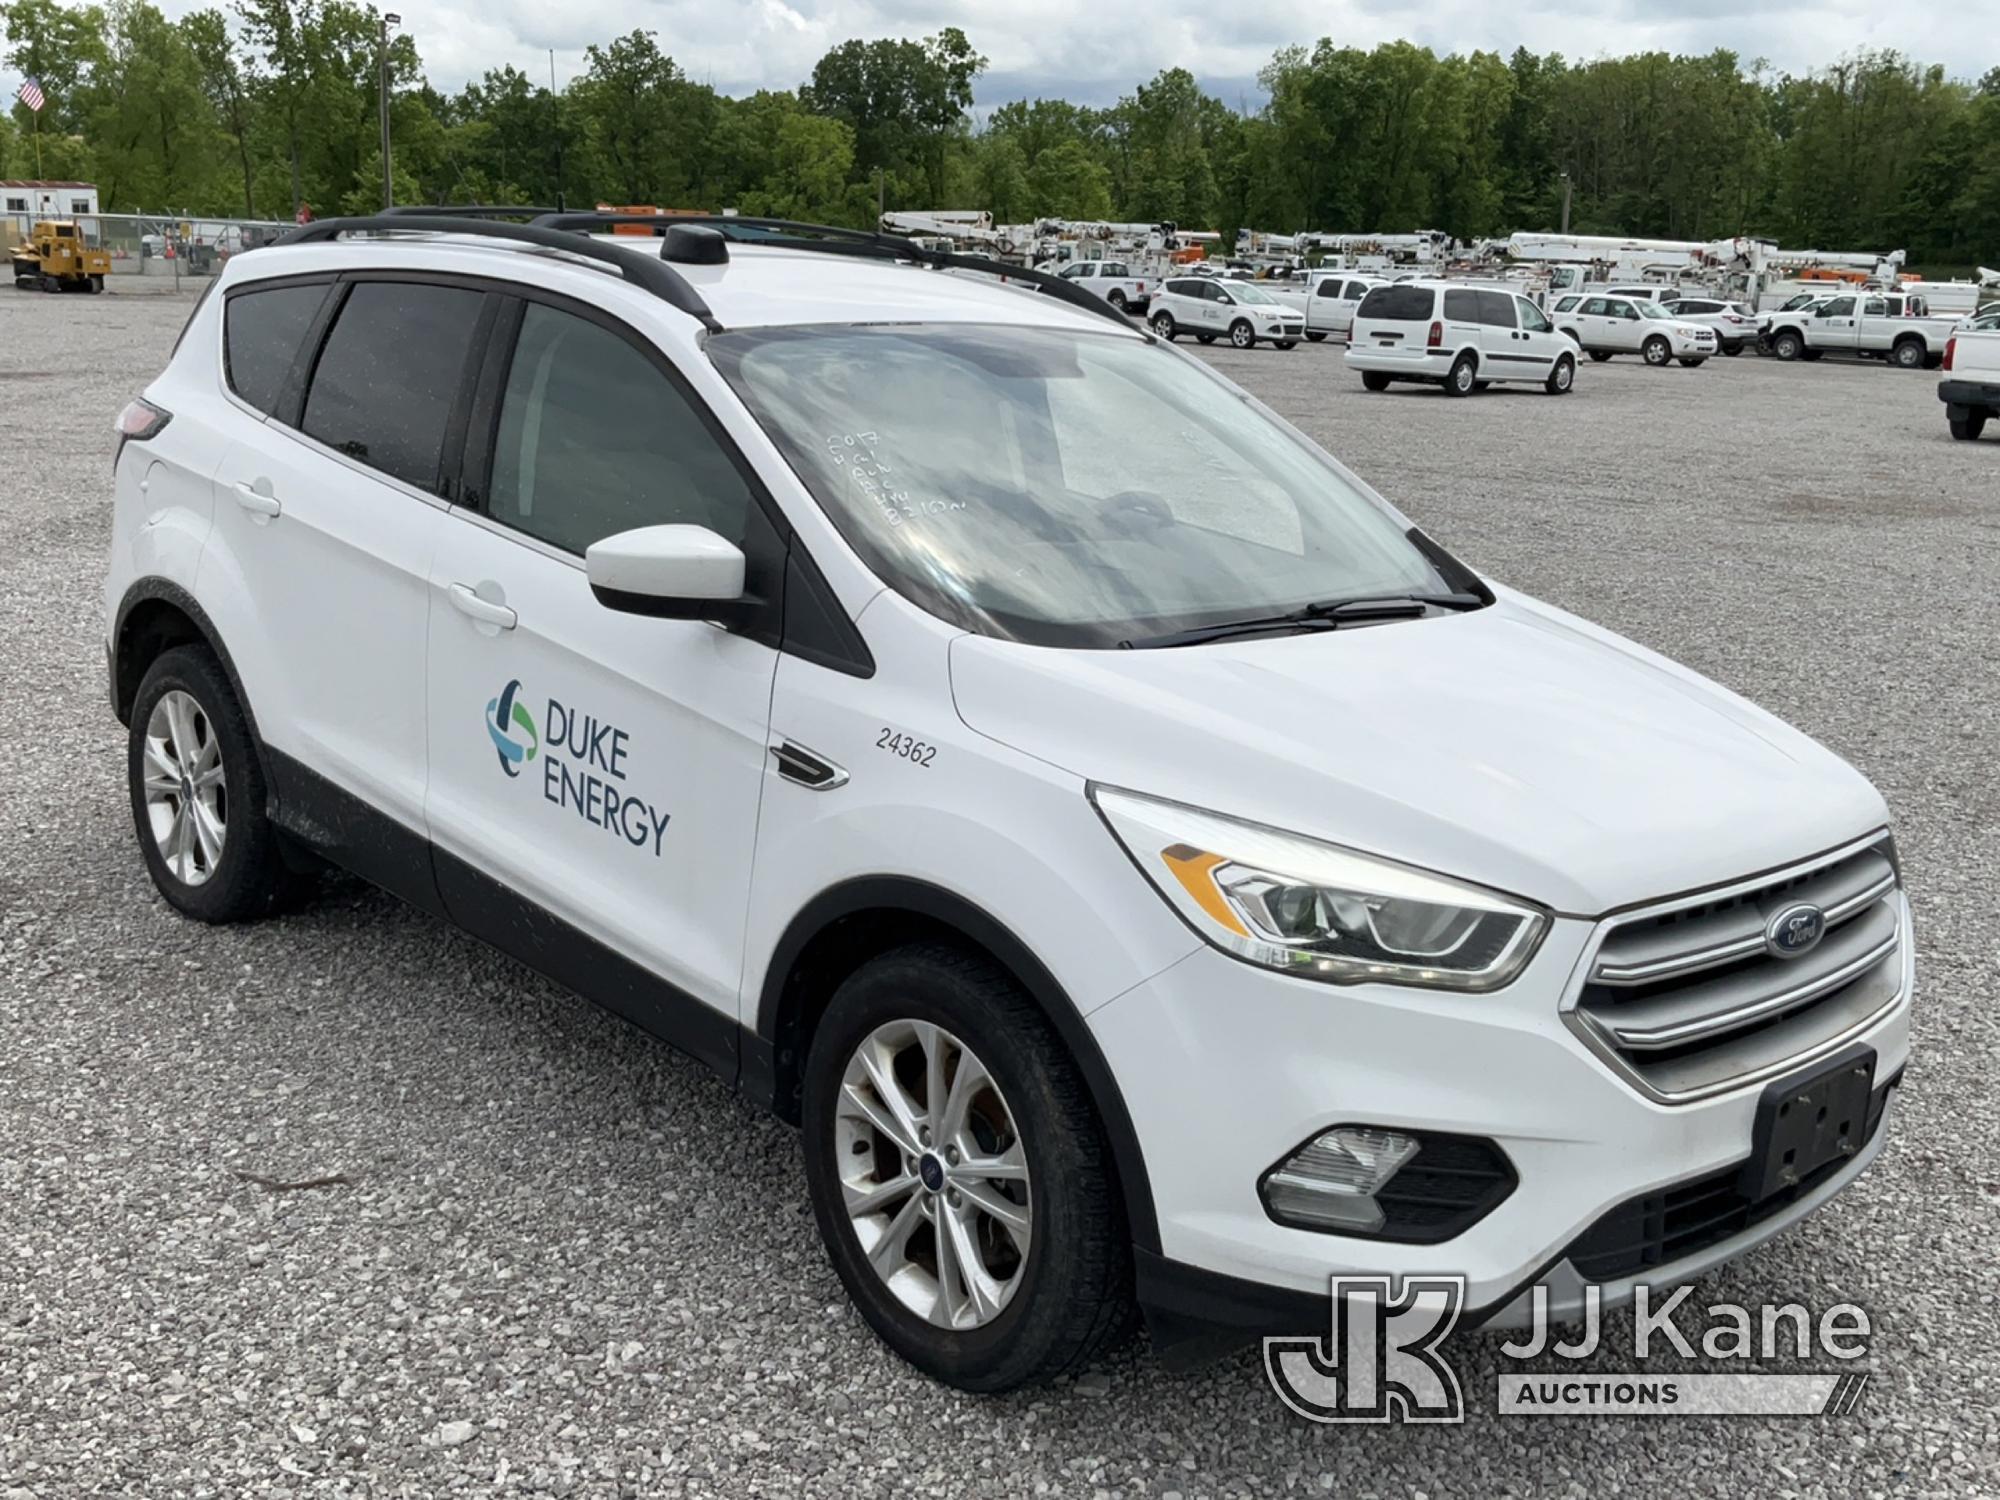 (Verona, KY) 2017 Ford Escape 4x4 4-Door Sport Utility Vehicle Runs & Moves) (Check Engine Light On,